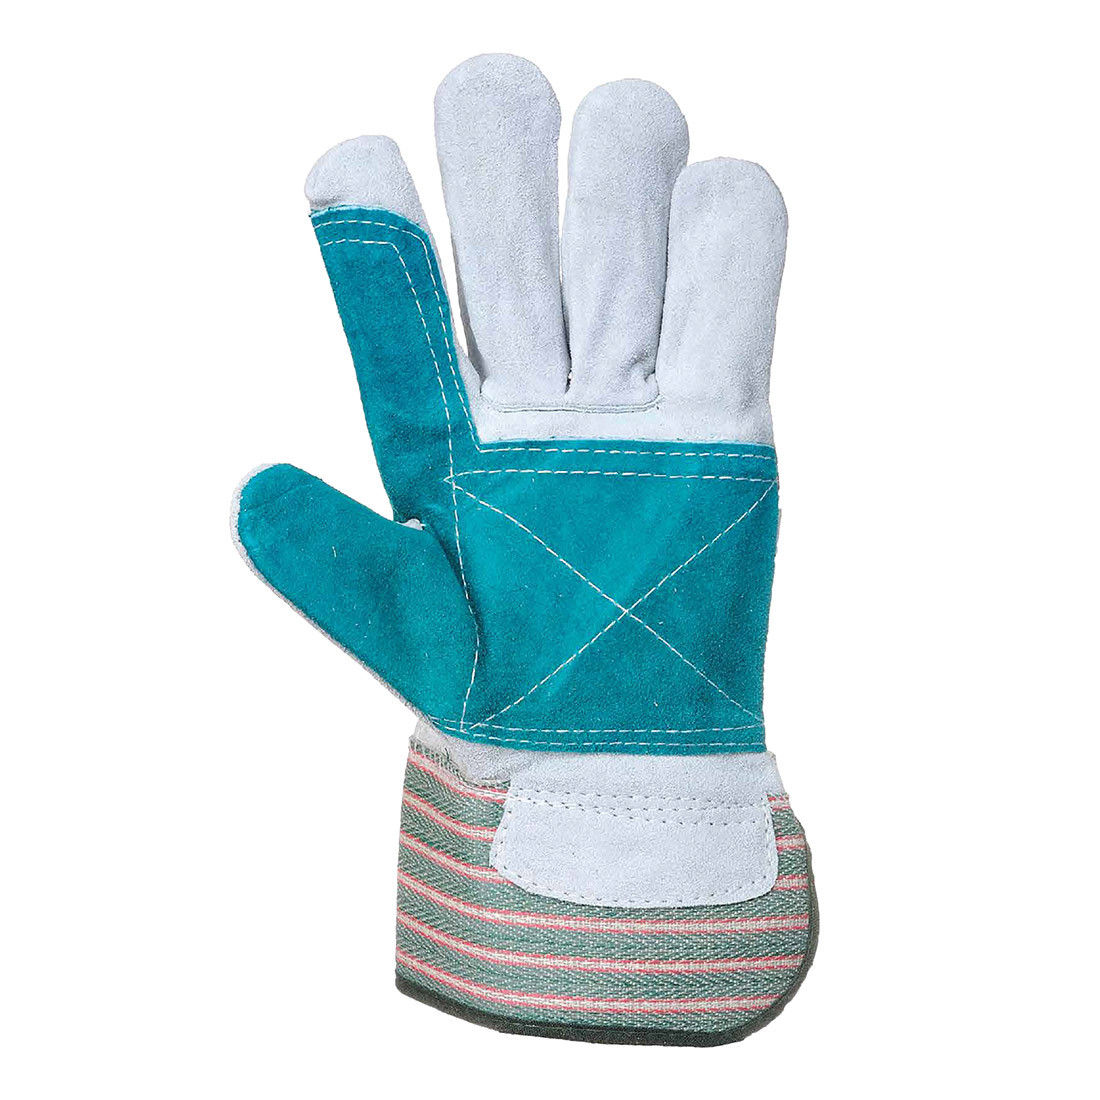 Classic Double Palm Rigger Glove - Personal protection